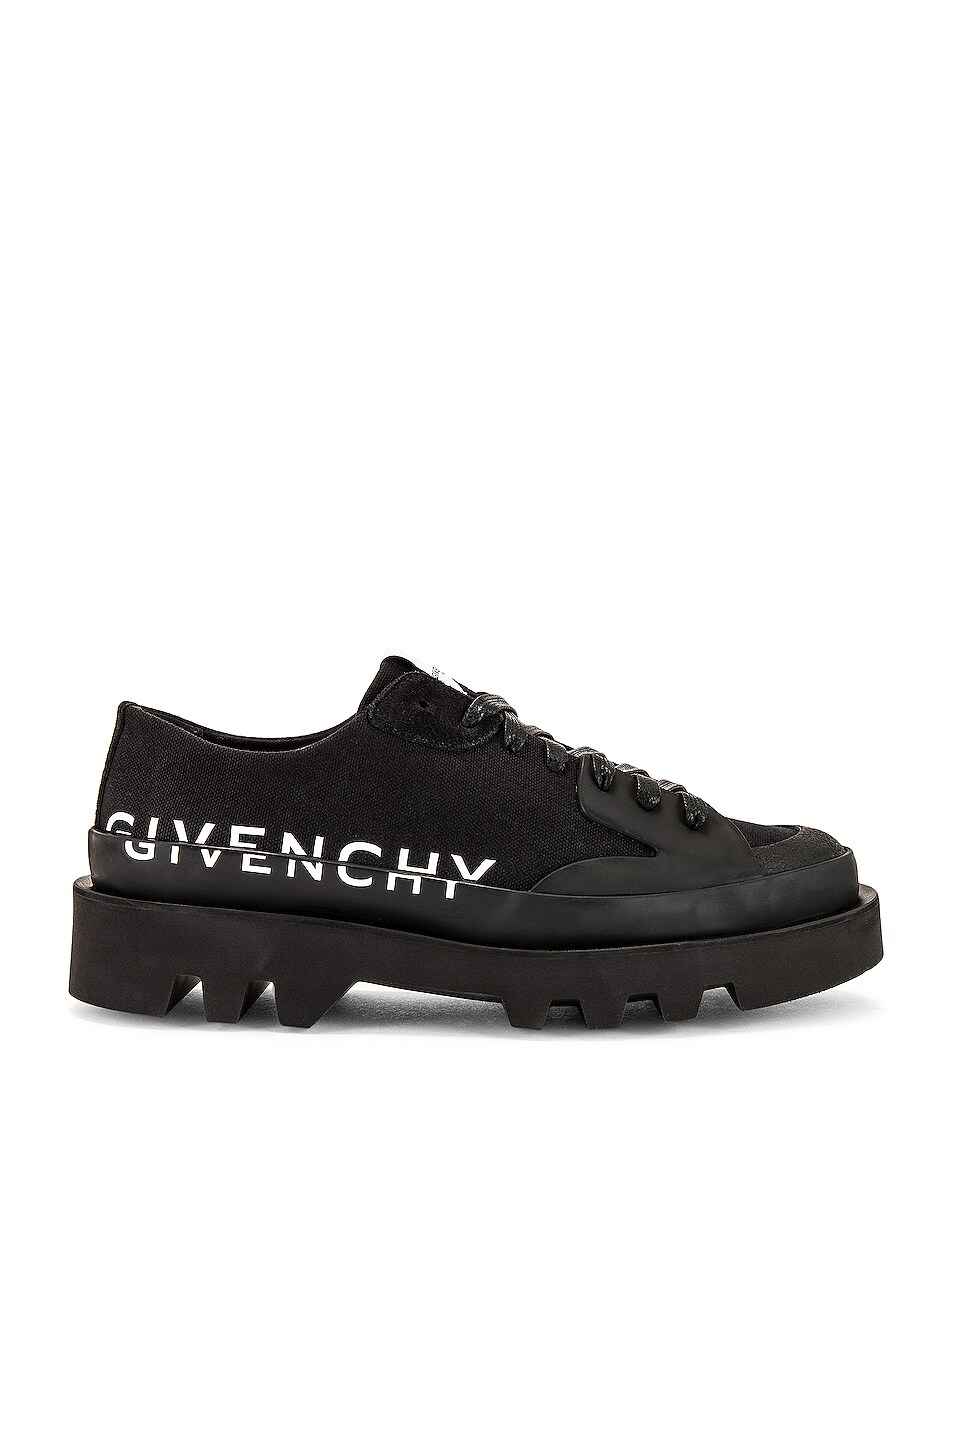 Image 1 of Givenchy Clapham Low Top Shoe in Black